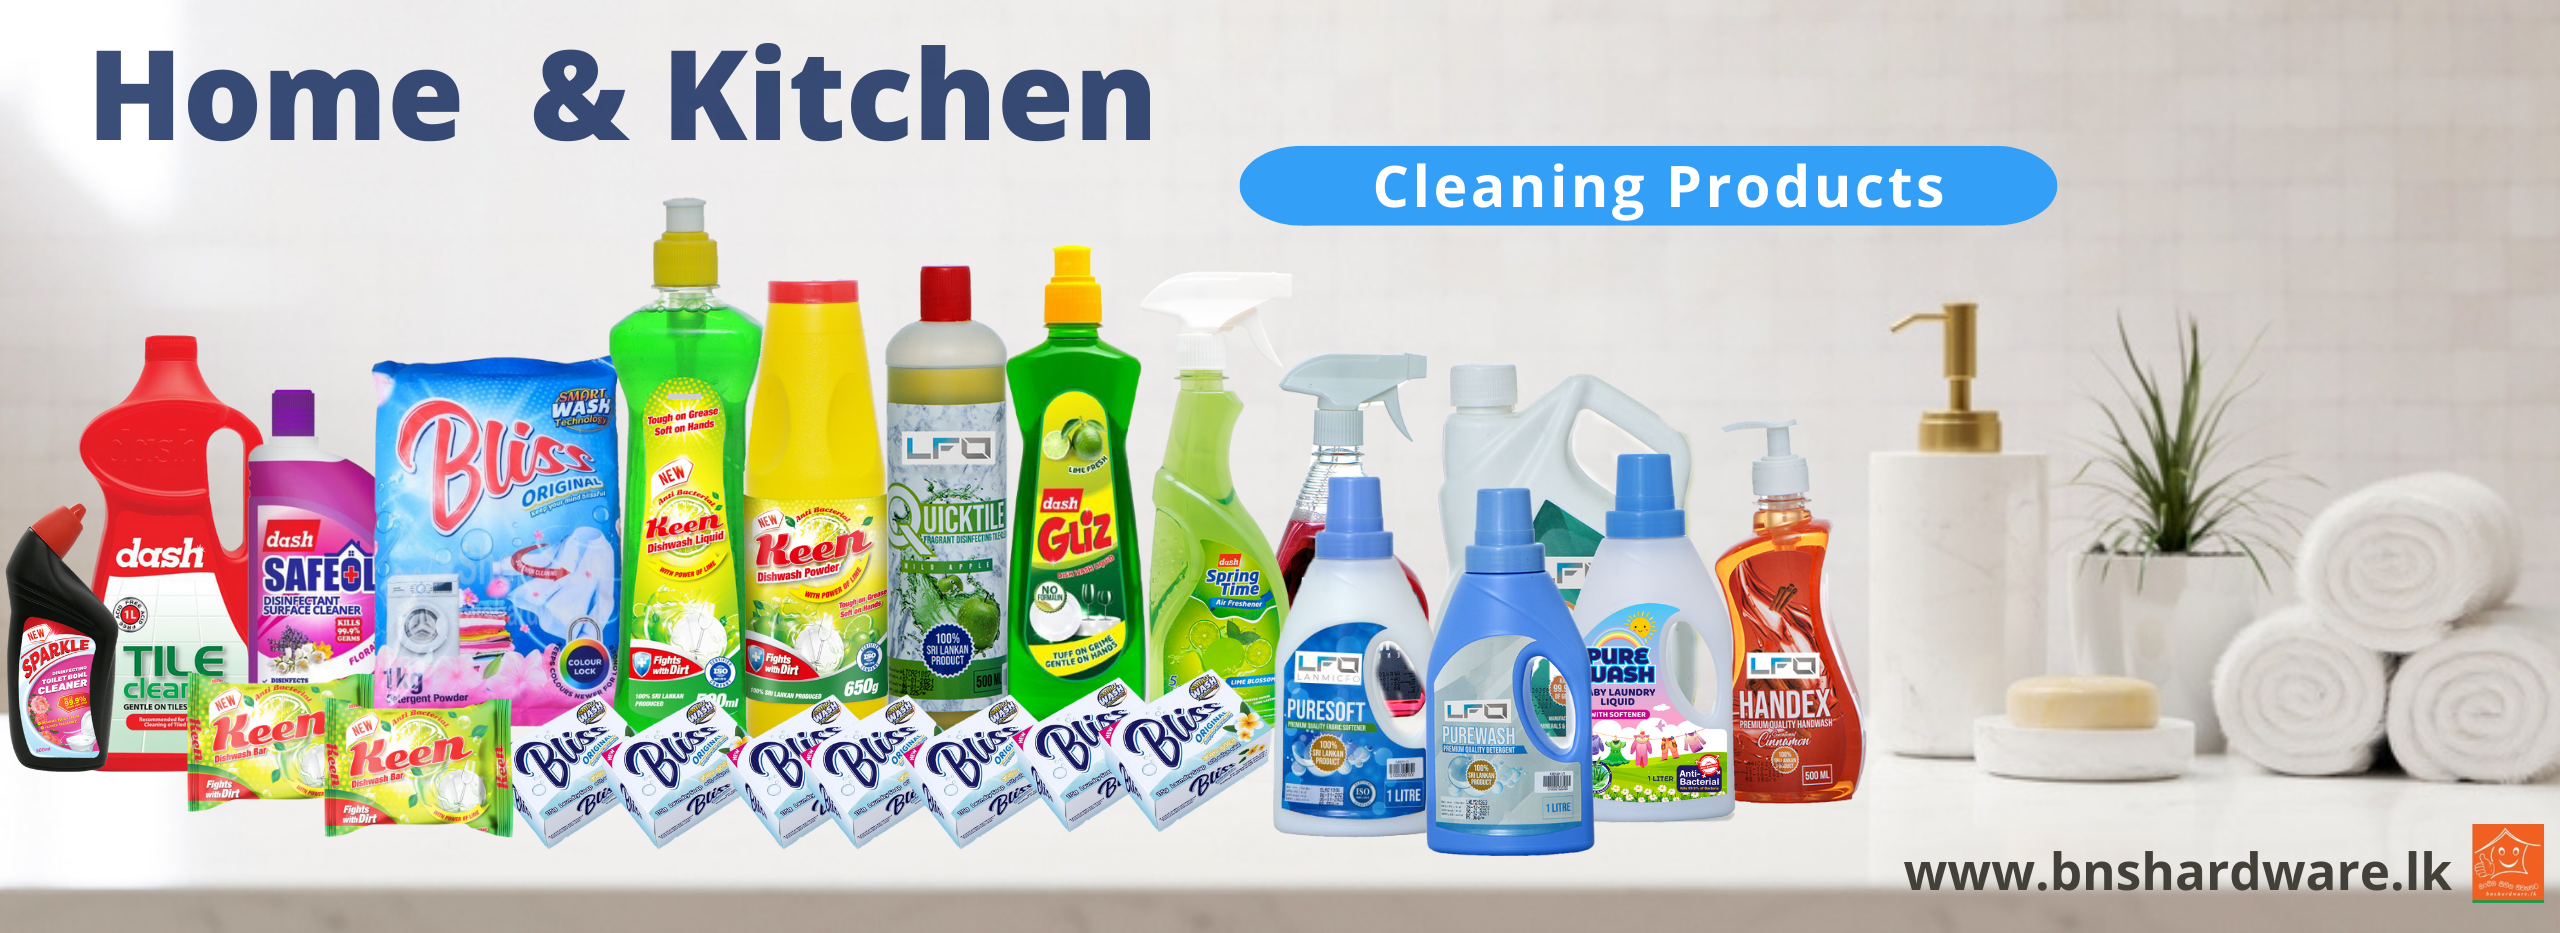 Cleanning products